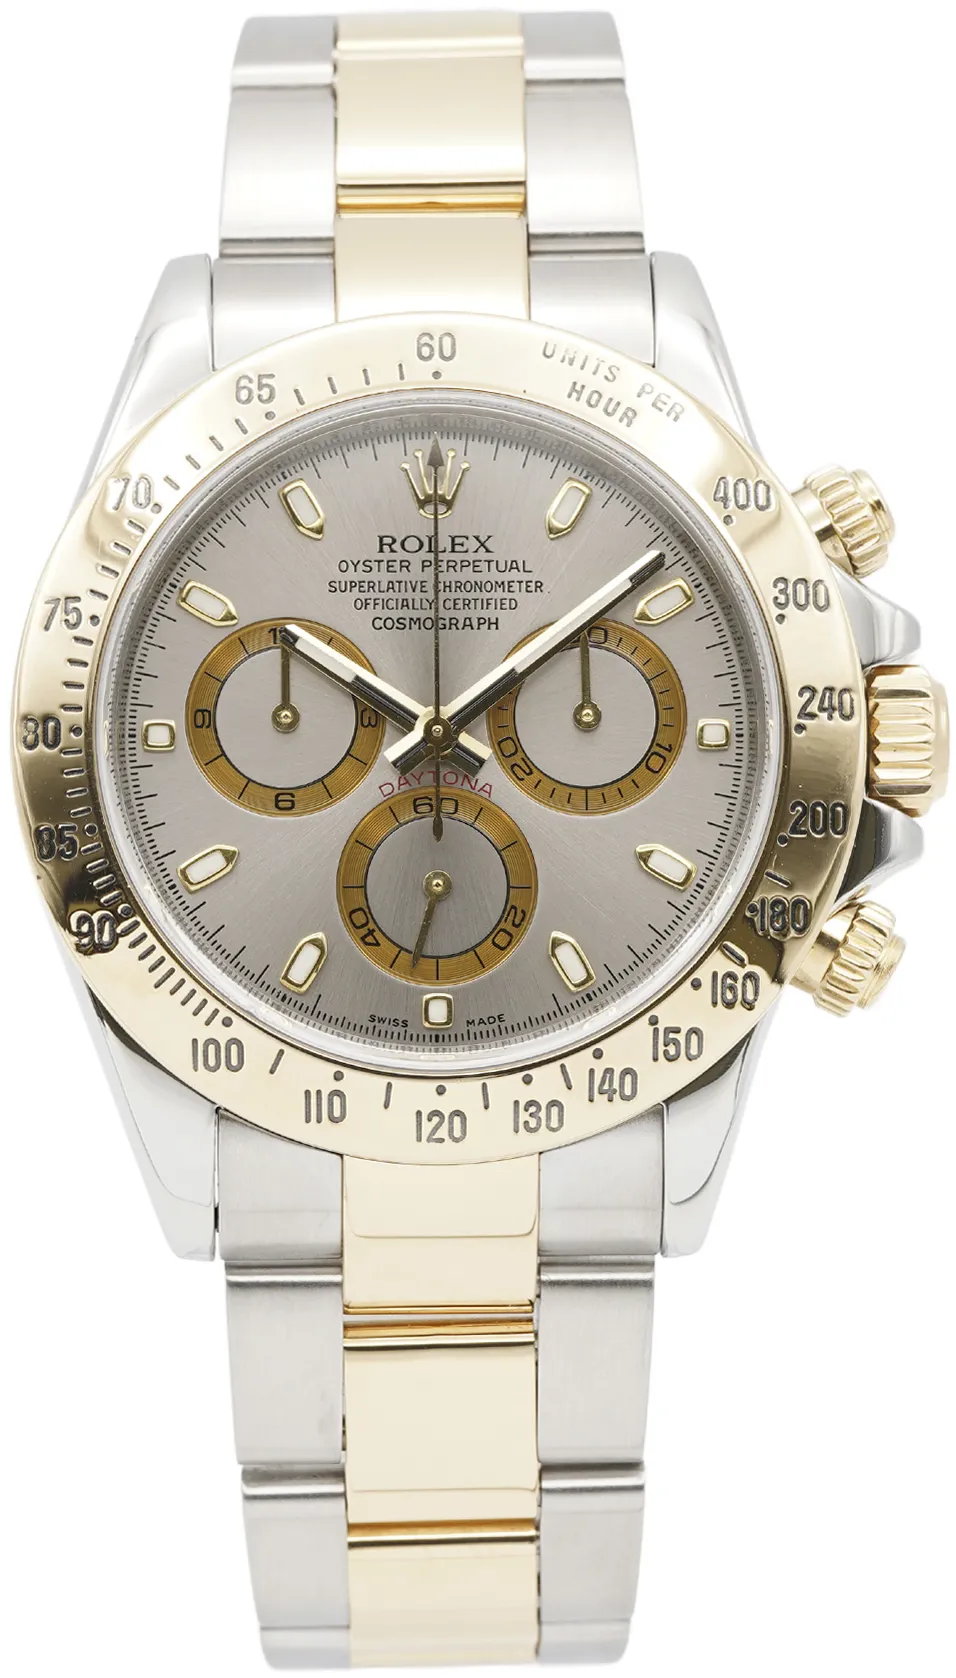 Rolex Daytona 116523 40mm Yellow gold and stainless steel •